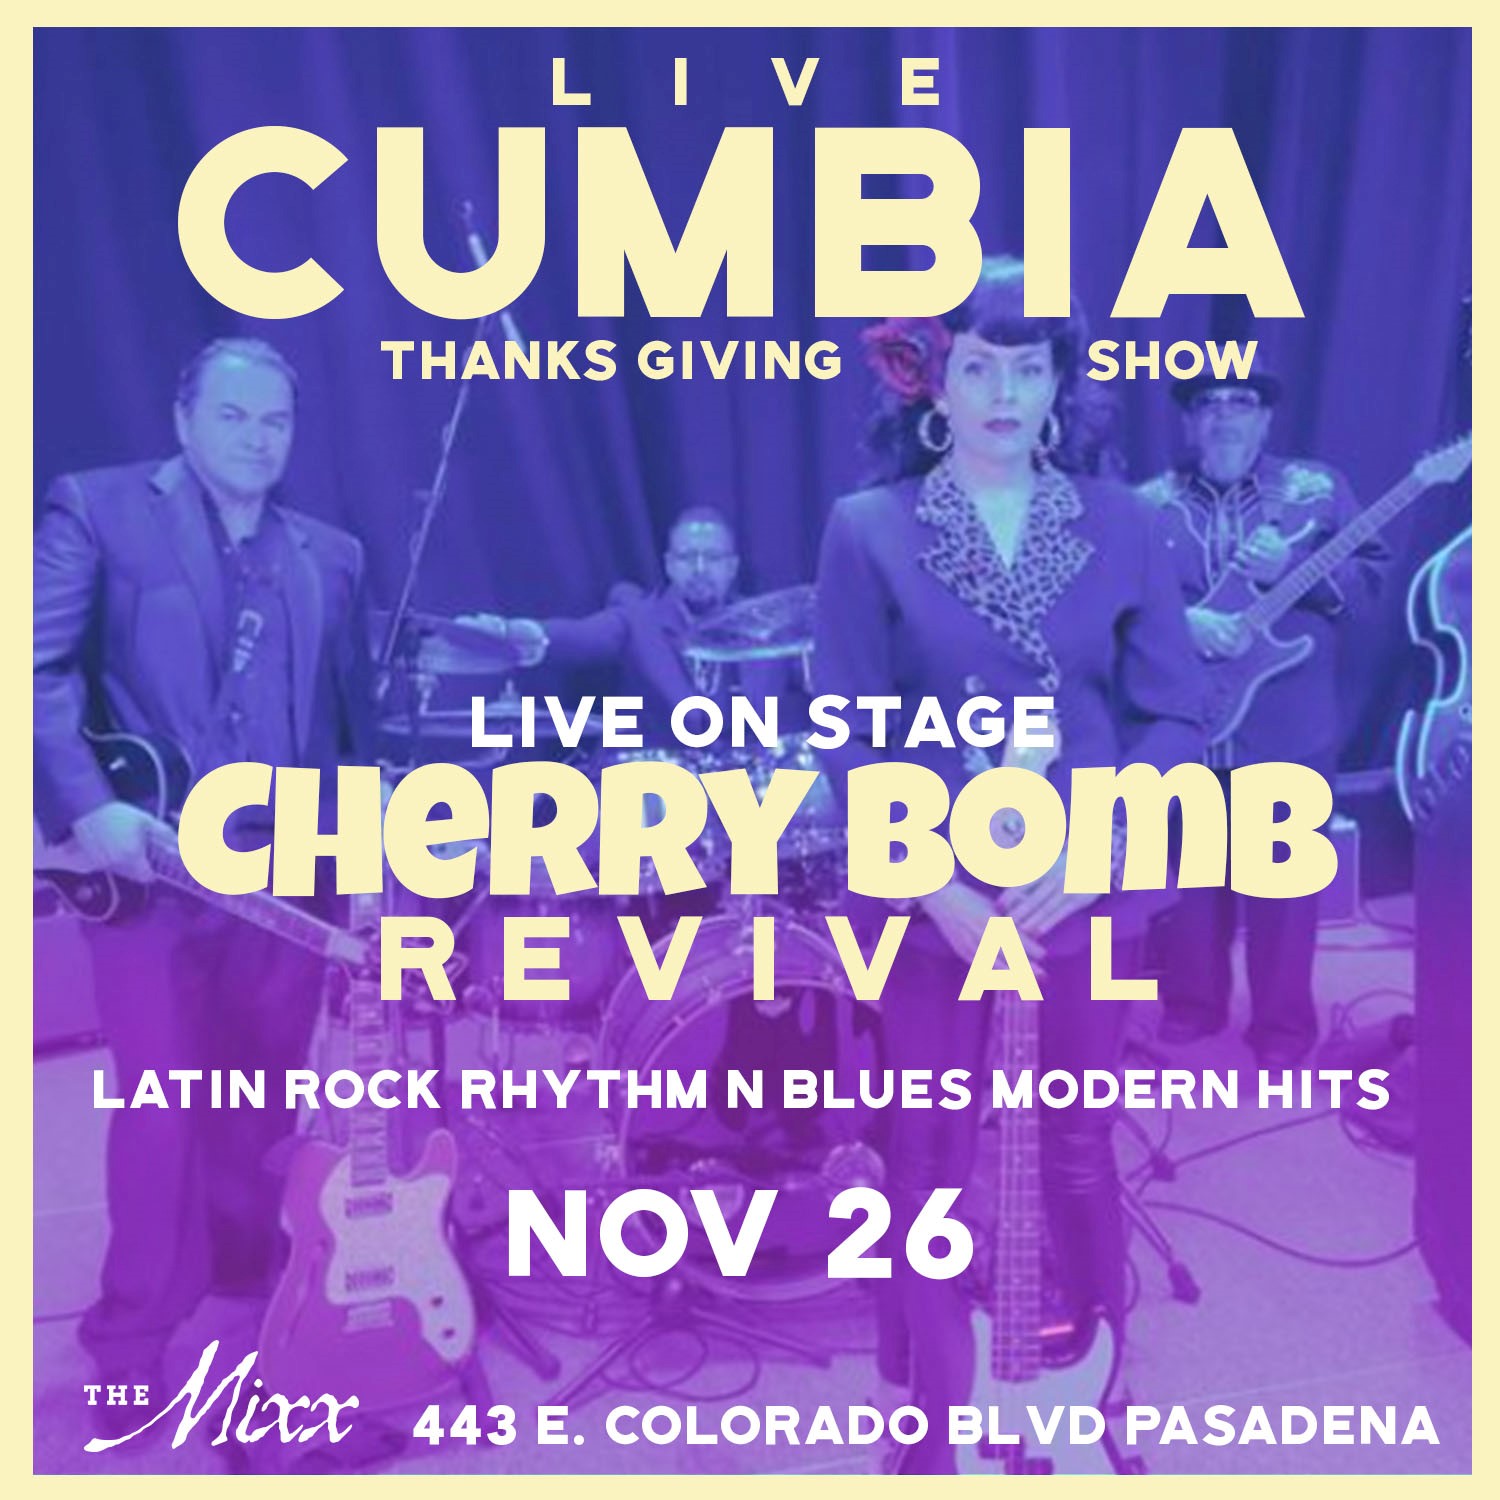 You are currently viewing Thanks Giving Live Cumbia and Dance Hits Dance Party